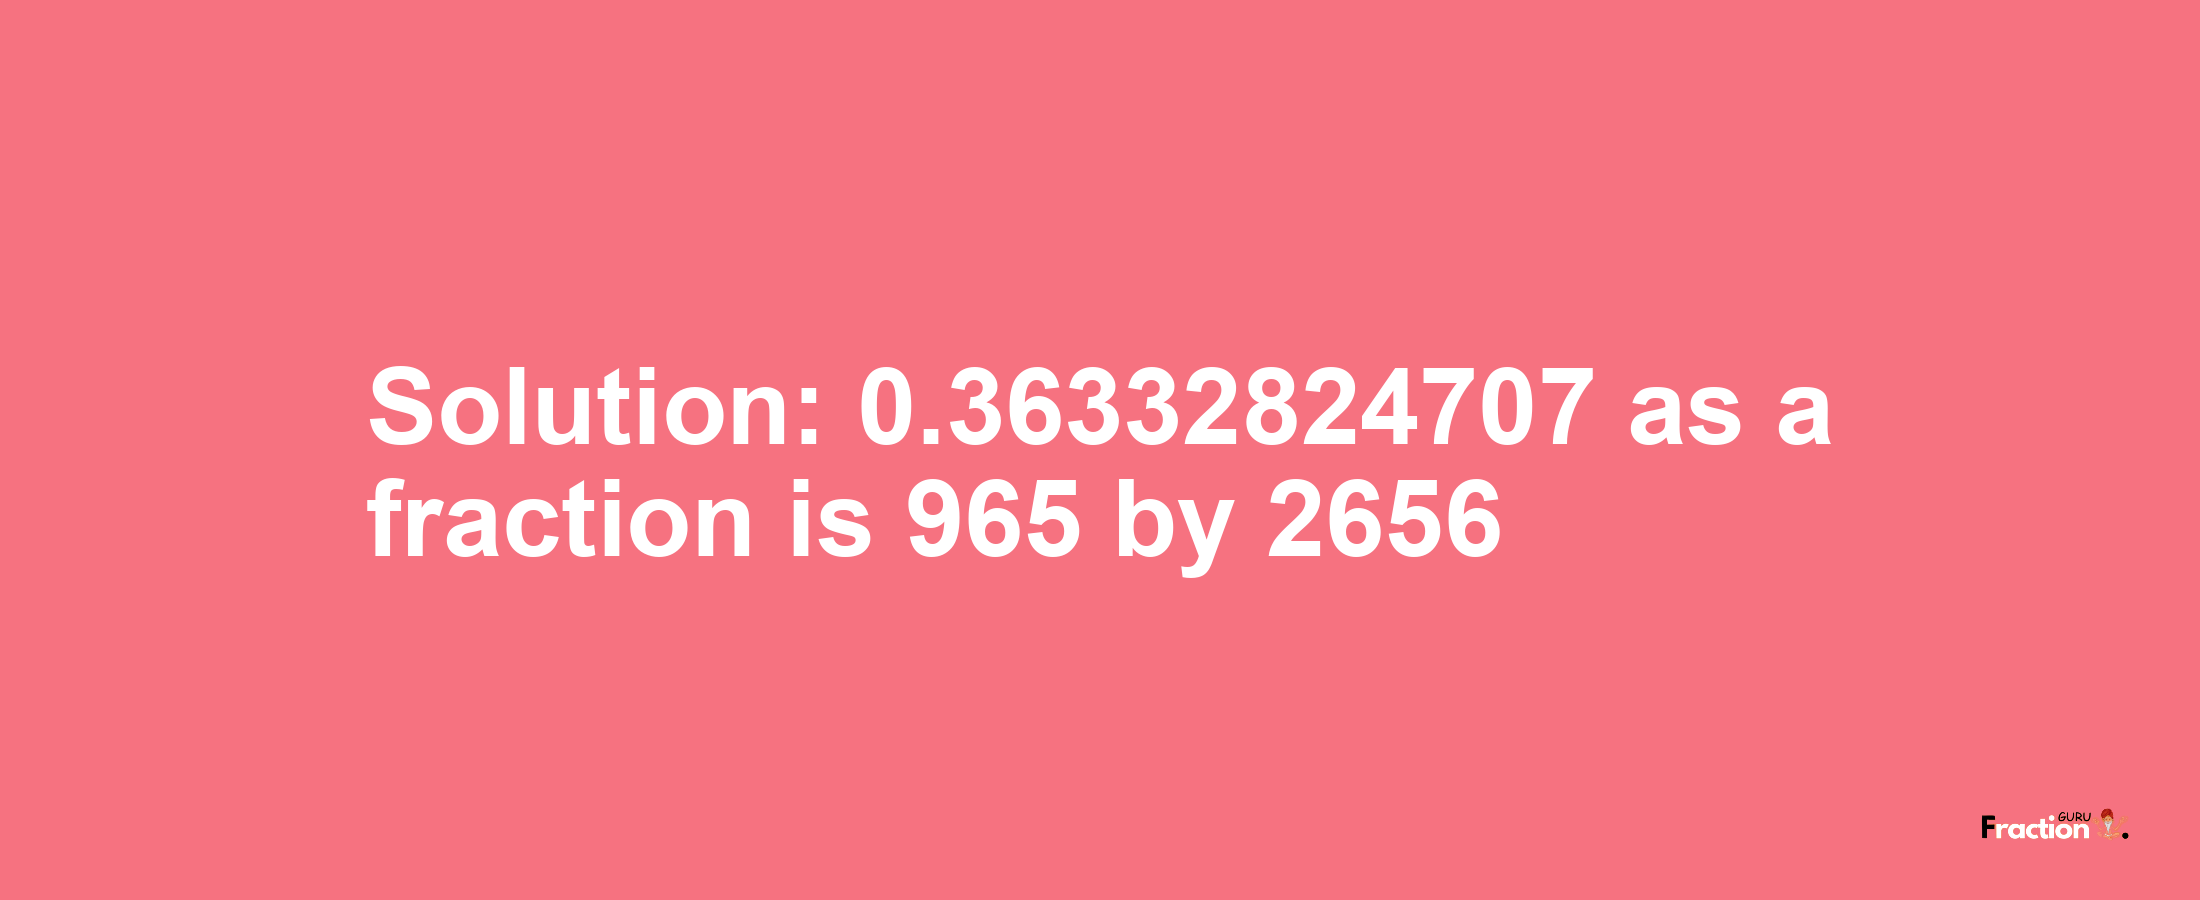 Solution:0.36332824707 as a fraction is 965/2656